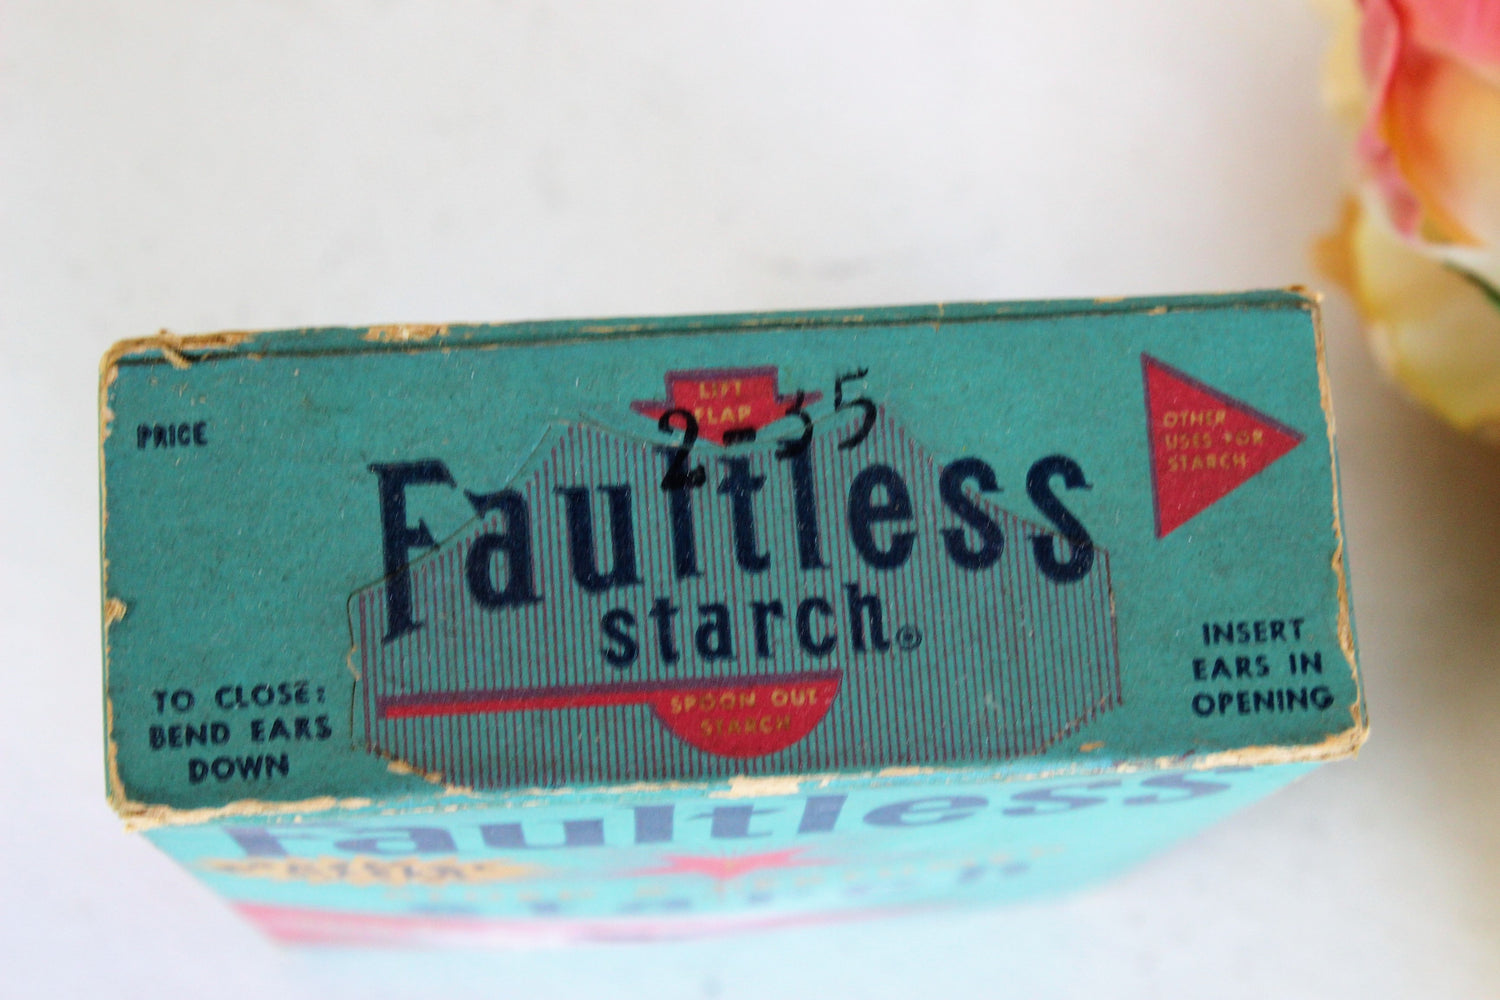 Vintage 1940s Faultless Starch Box Faultless, Unopened New